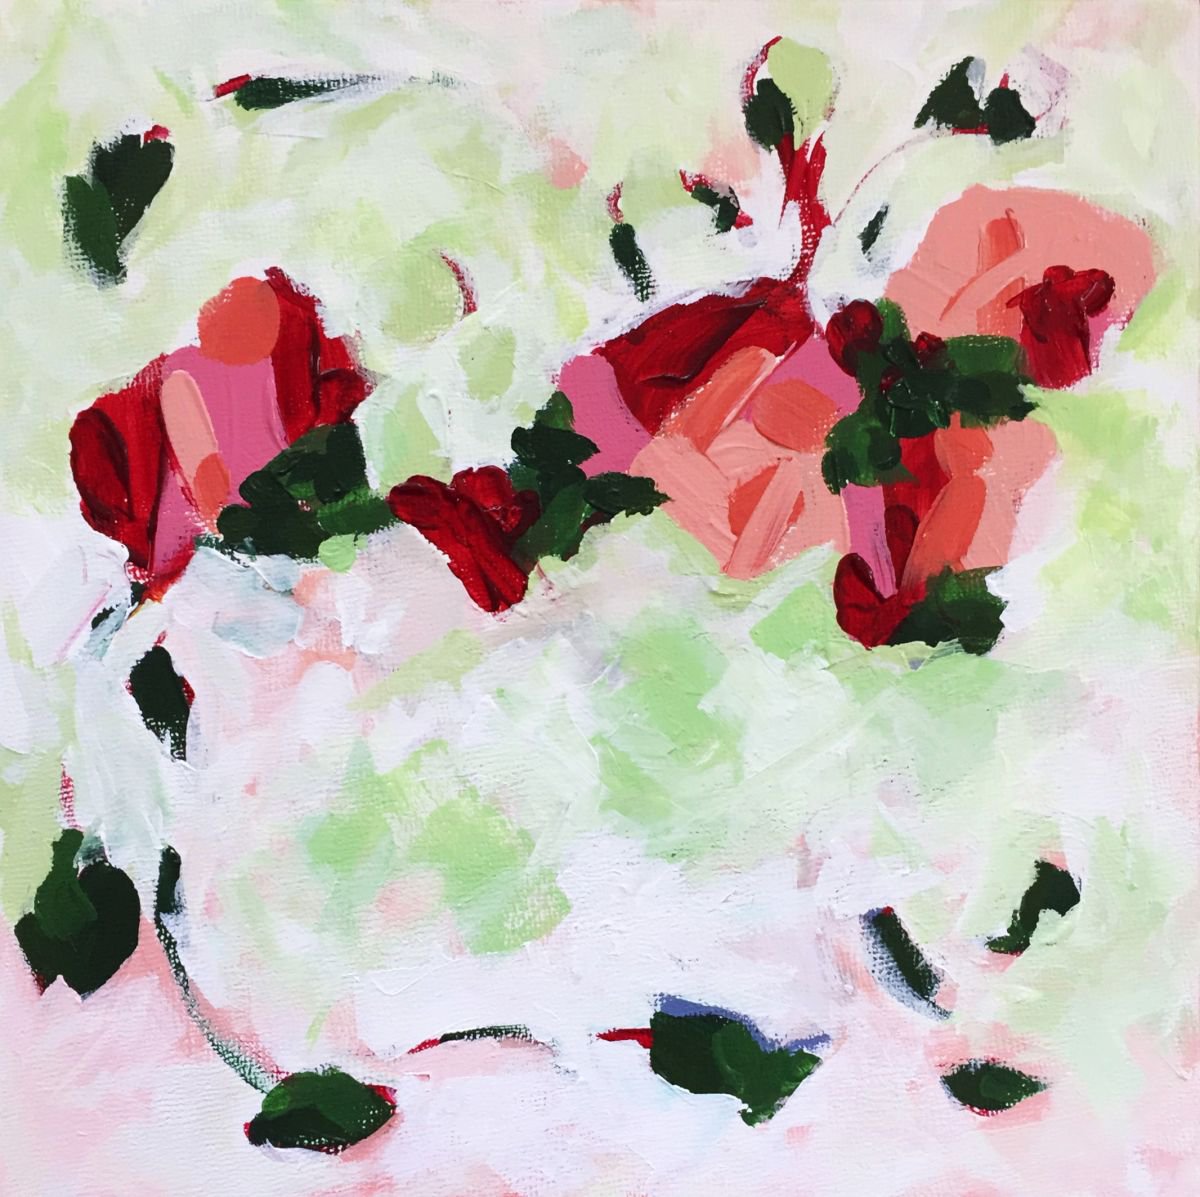 Floral Abstraction 4.2 - Acrylic on Panel by Tammy Silbermann